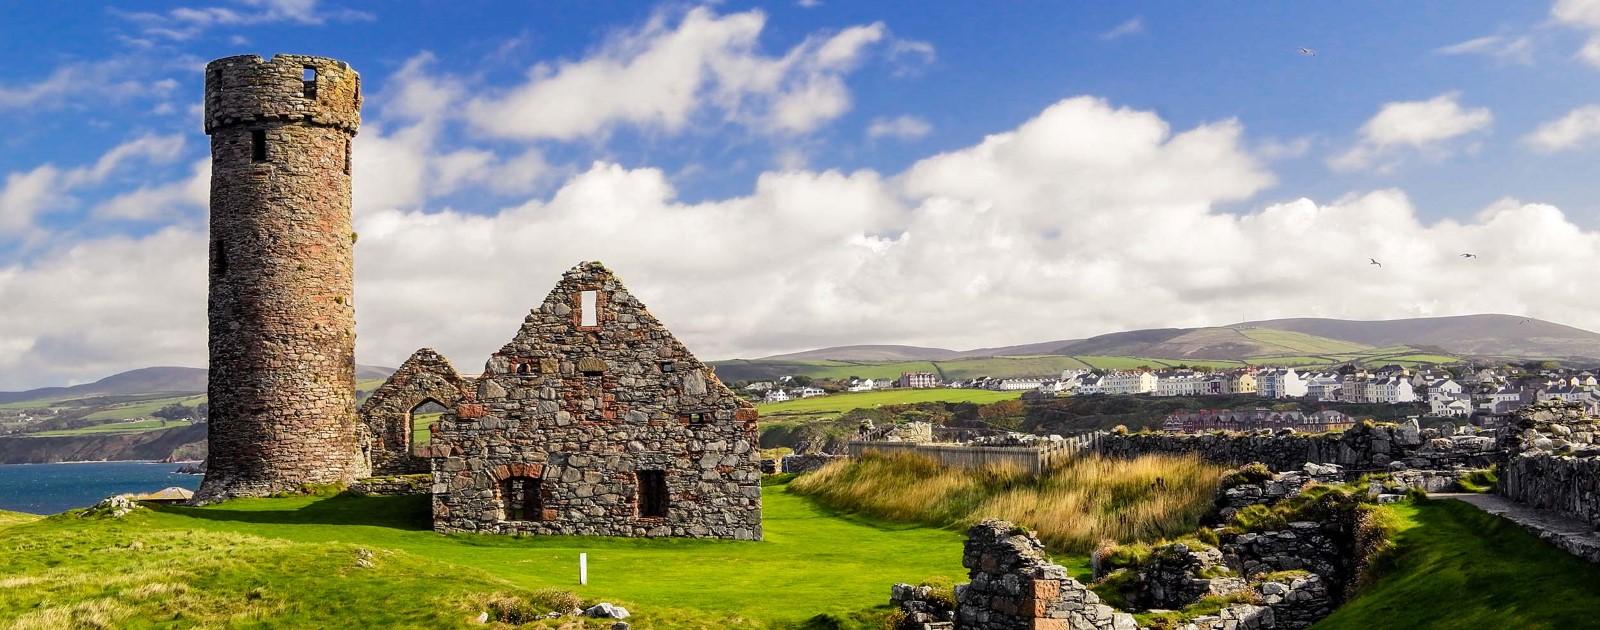 The British Isles and the Faroe Islands | Castles, Capitals and Vikings